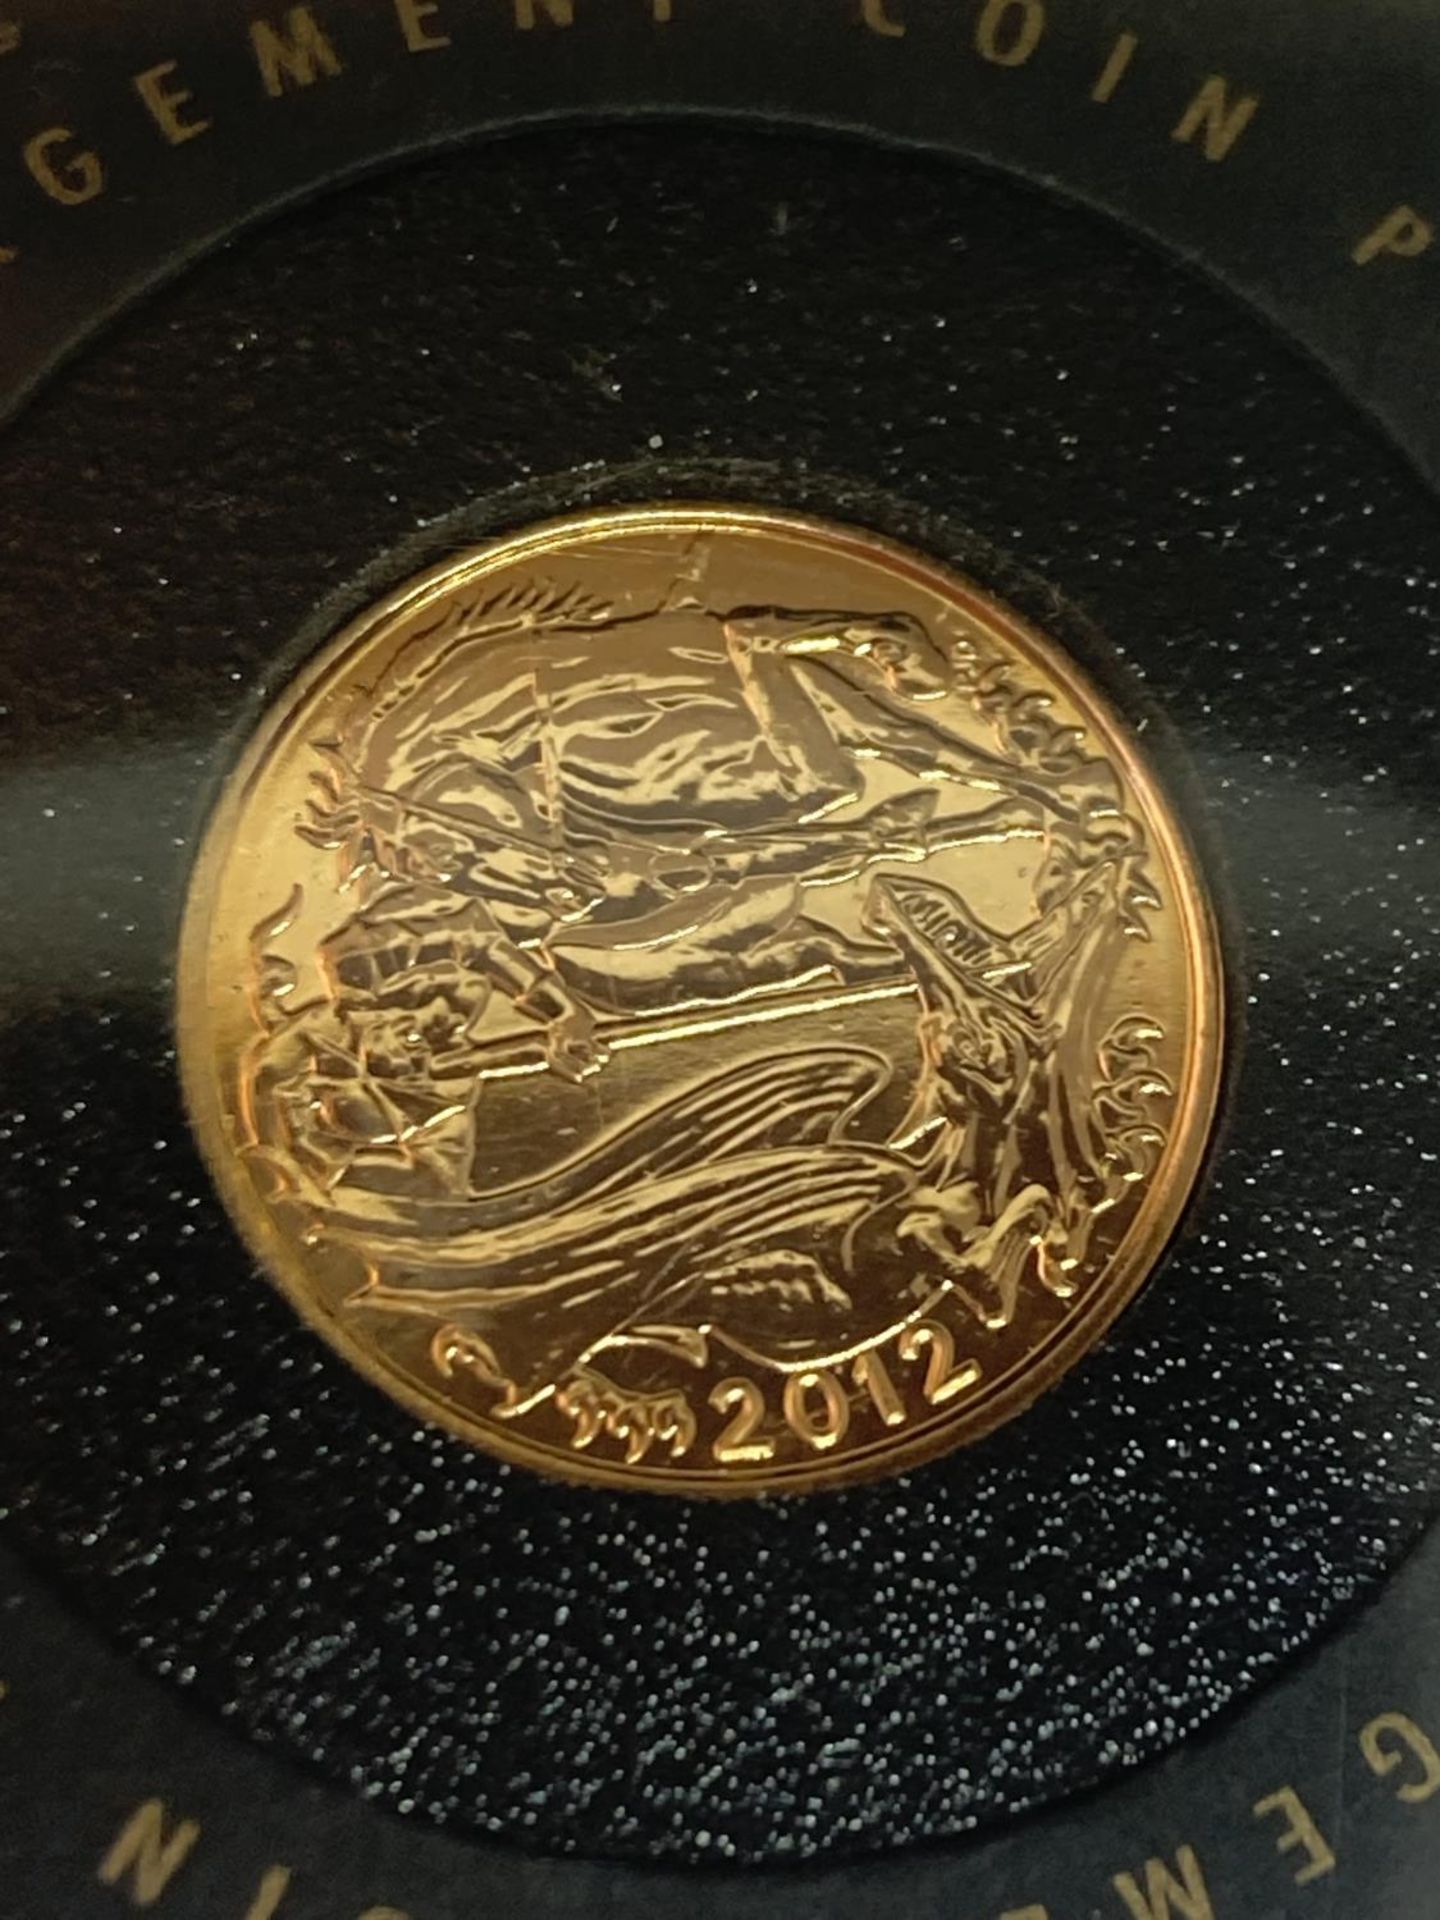 A 2012 DIAMOND JUBILEE GOLD SOVEREIGN WITH CERTIFICATE OF AUTHENTICITY - Image 2 of 3